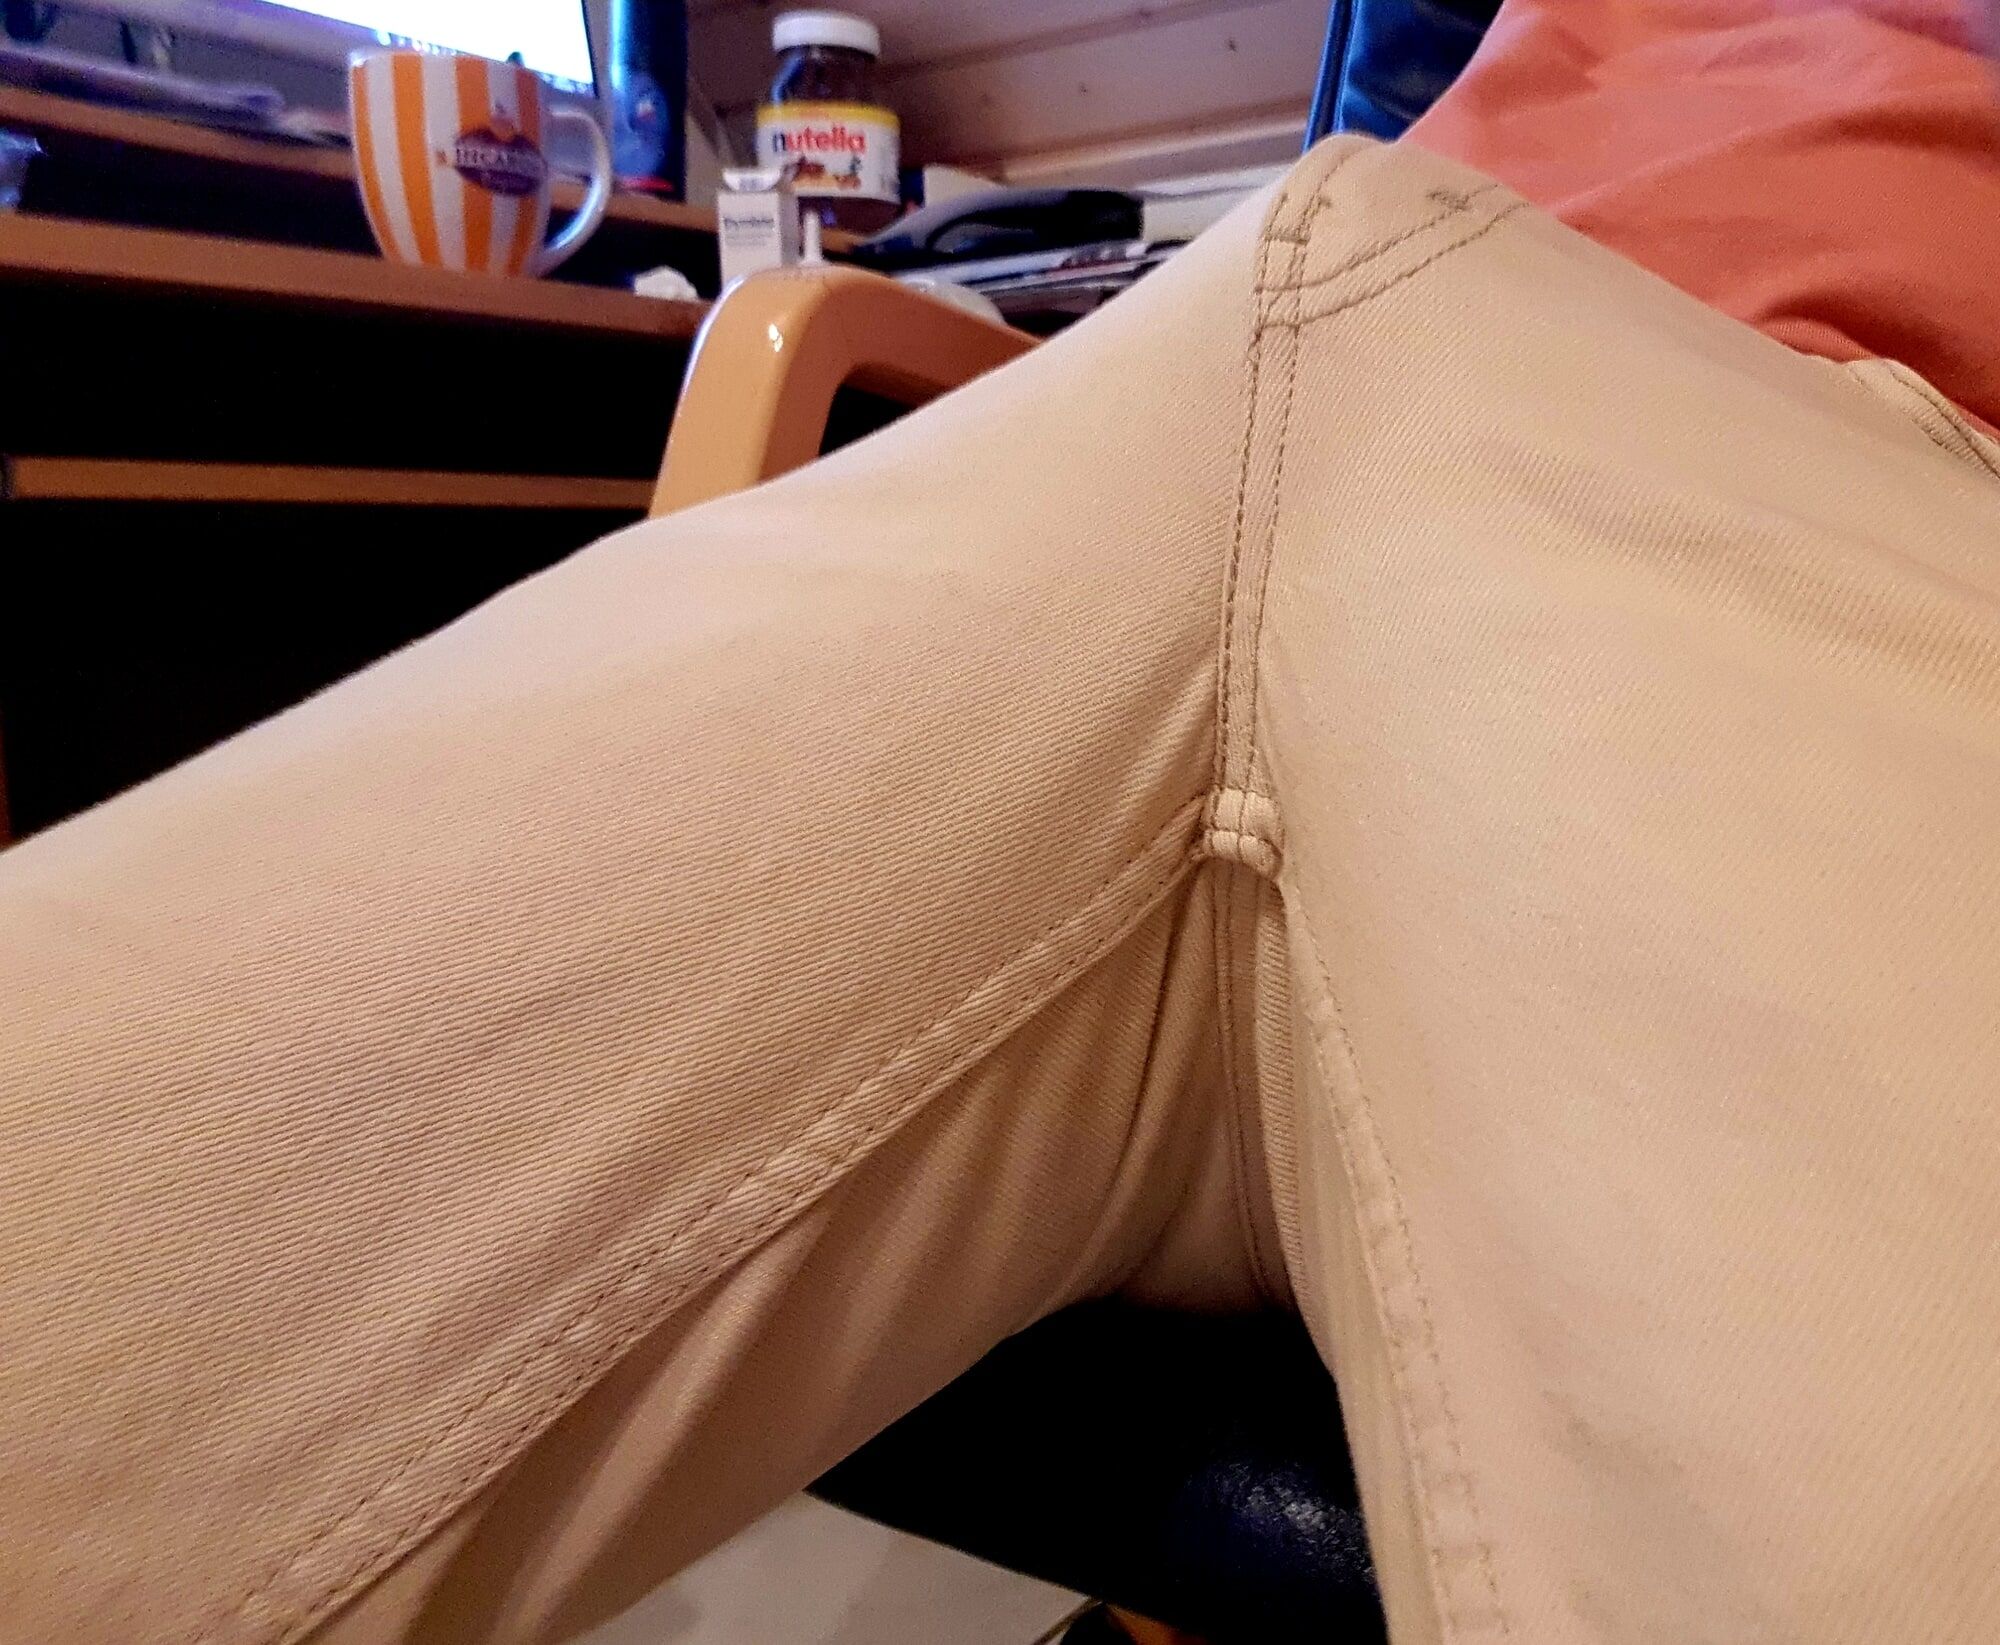 Erection in pants #11